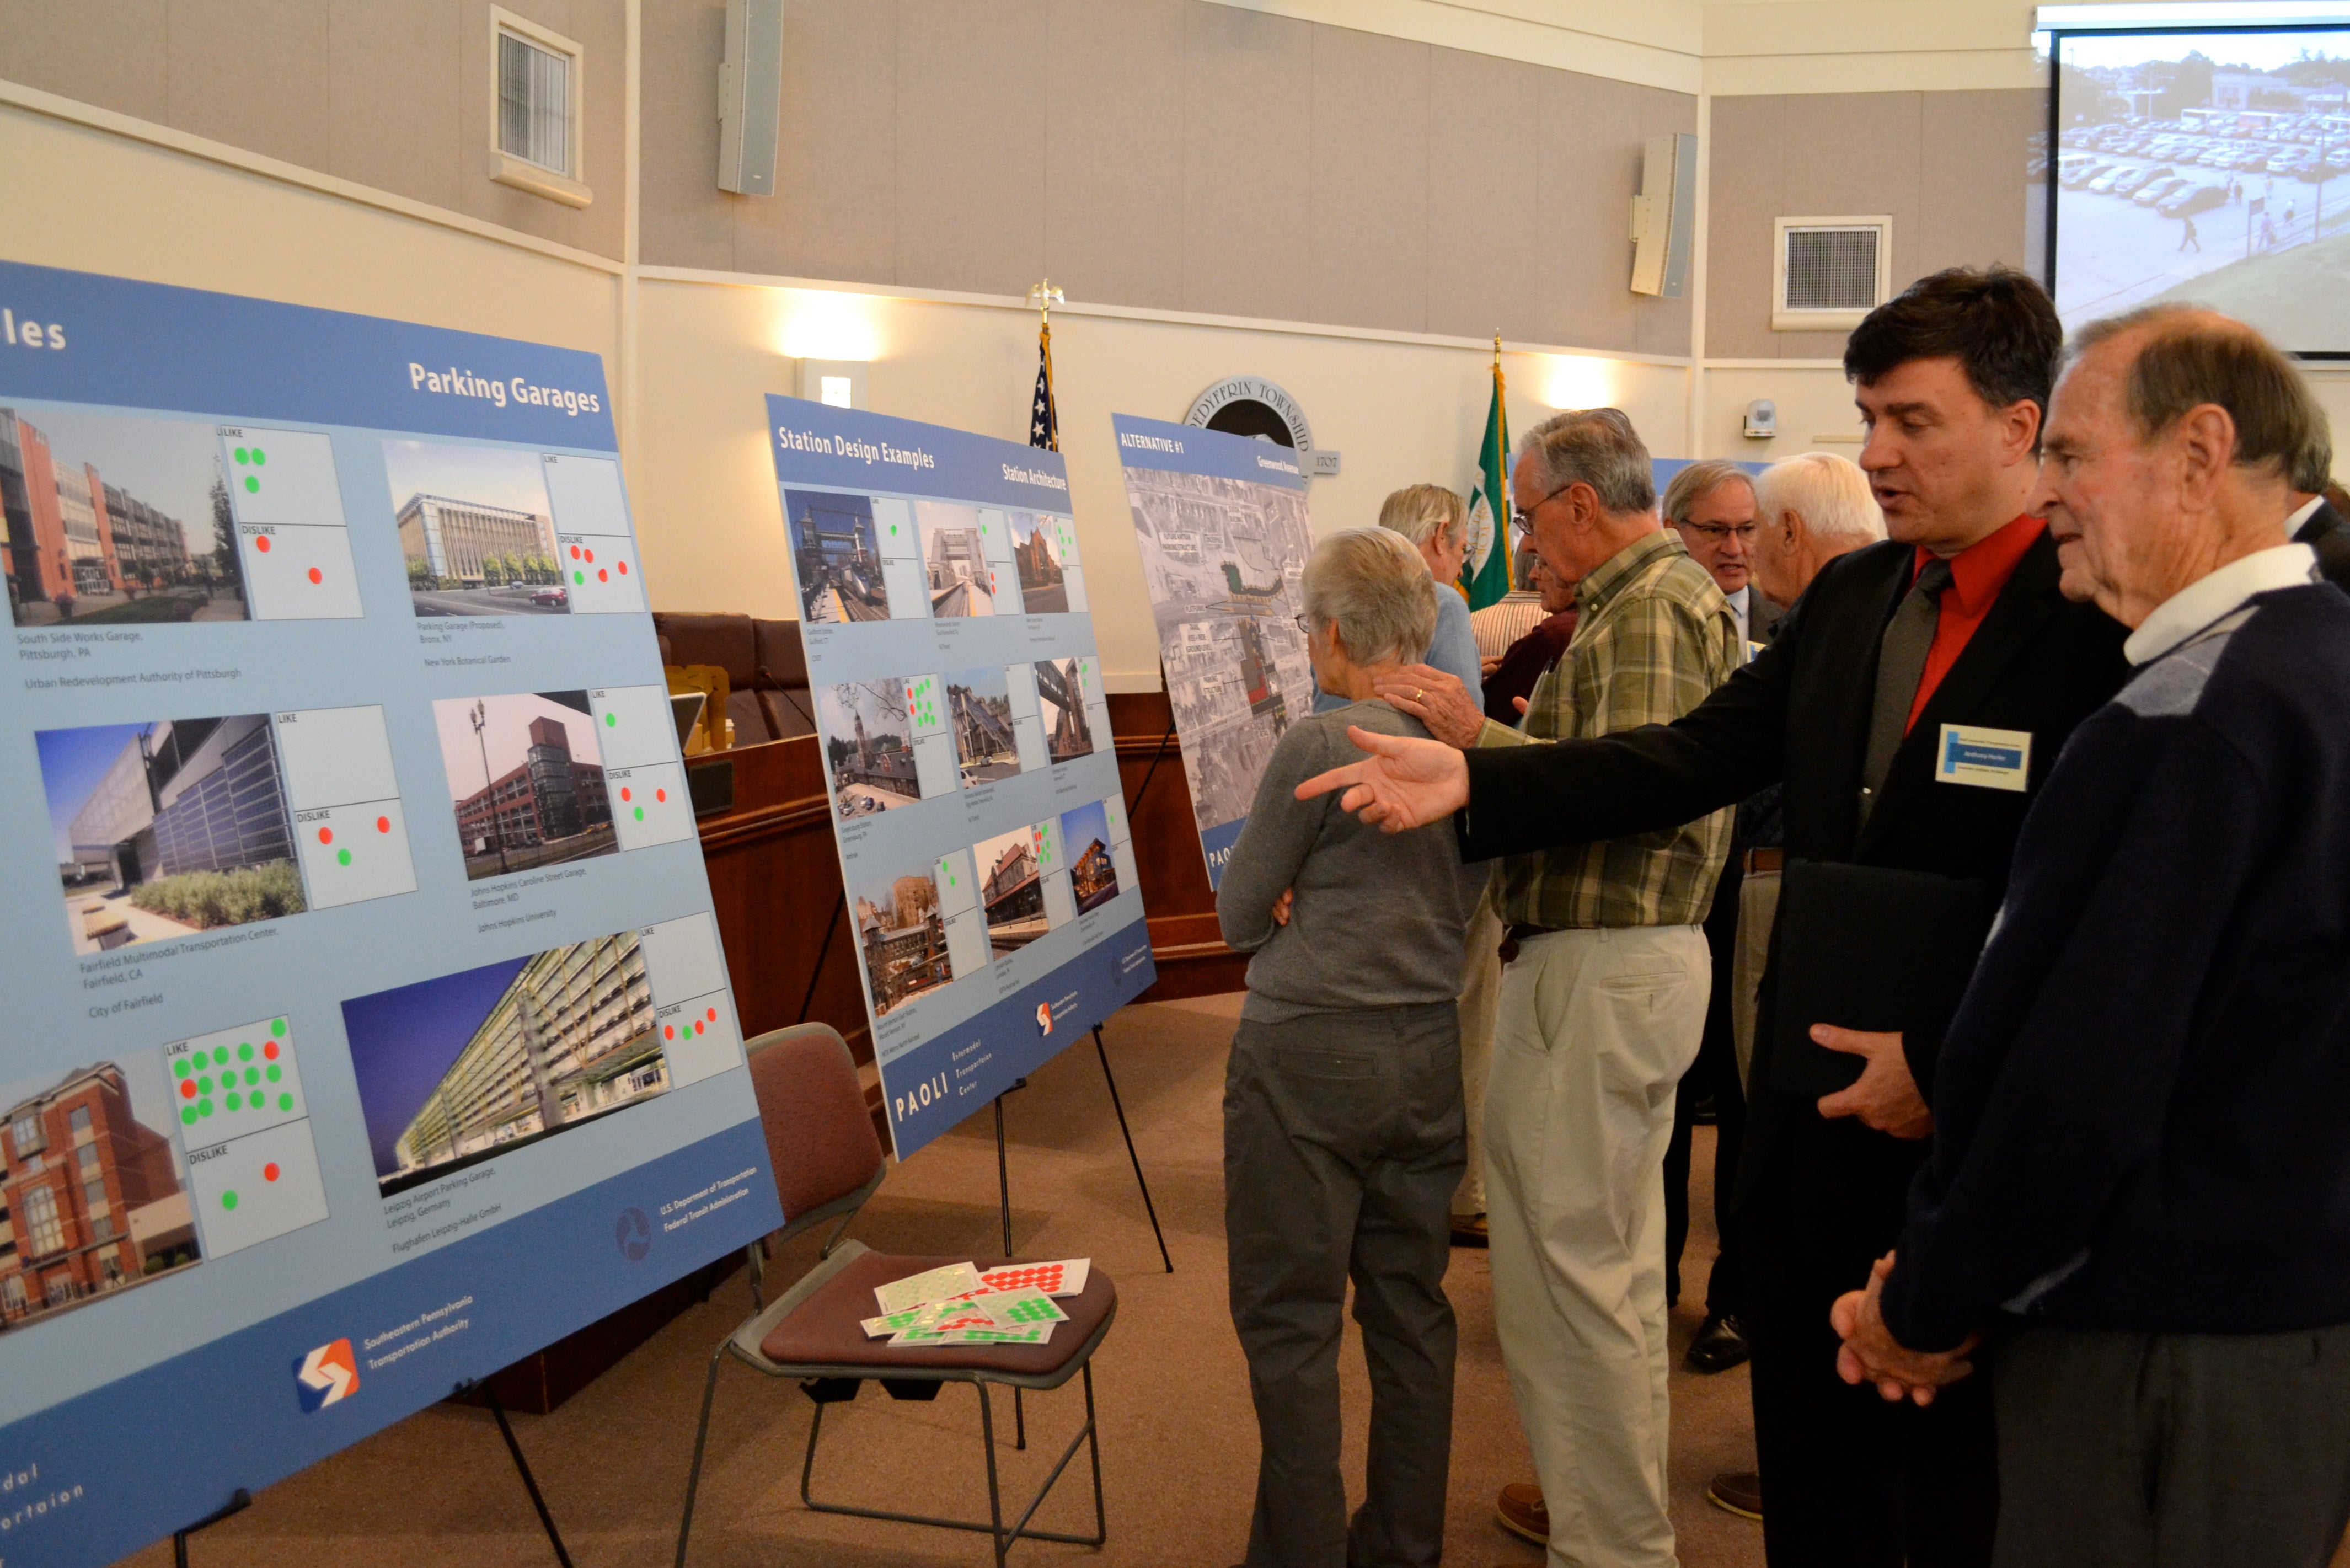 SEPTA presented similar projects around the country and asked what community members thought of those designs